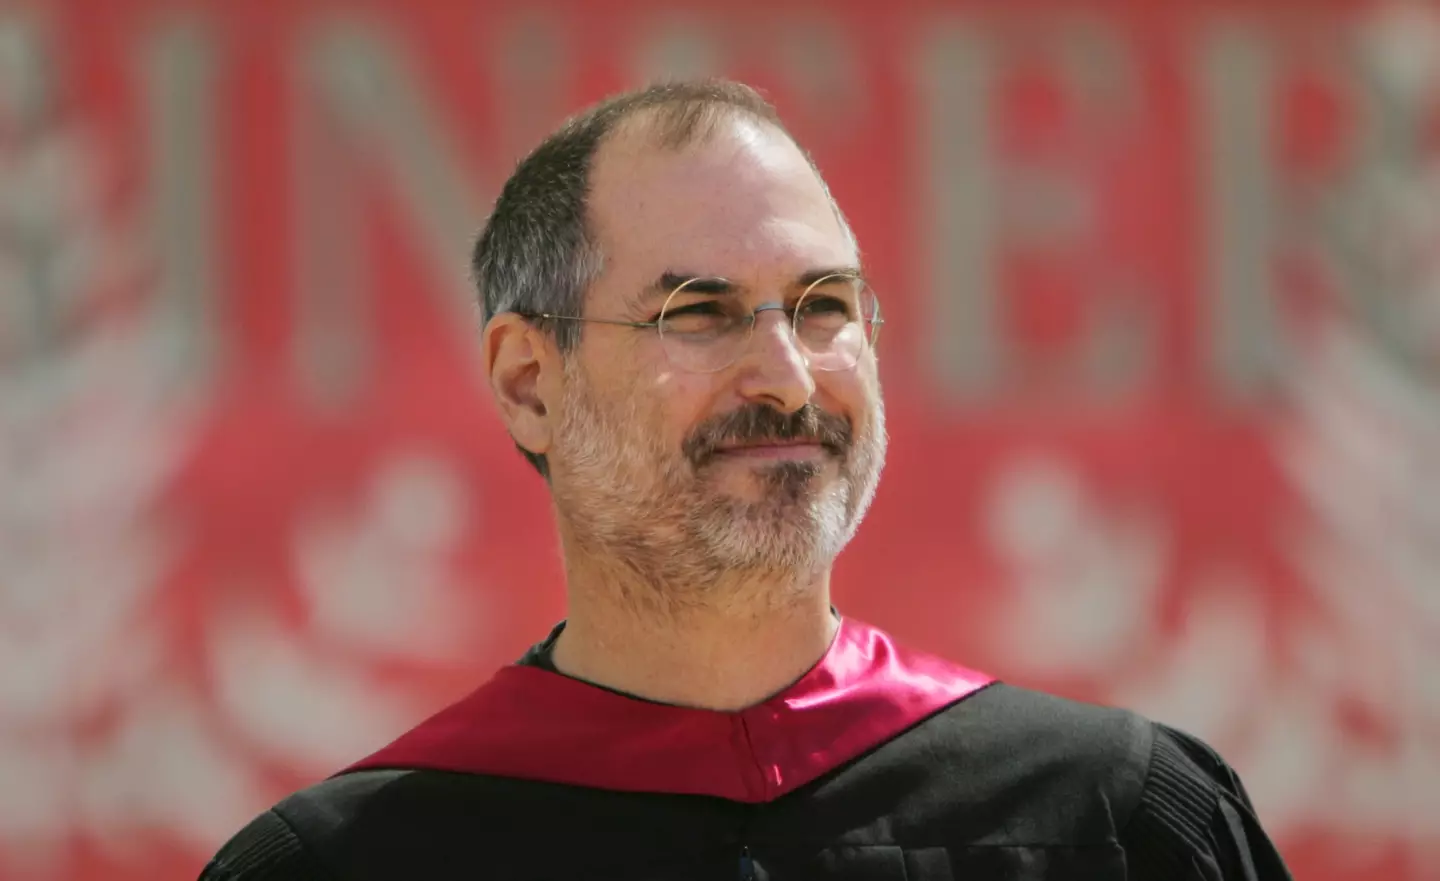 Jobs opened up about his approach to life during his 2005 commencement address at Stanford University.